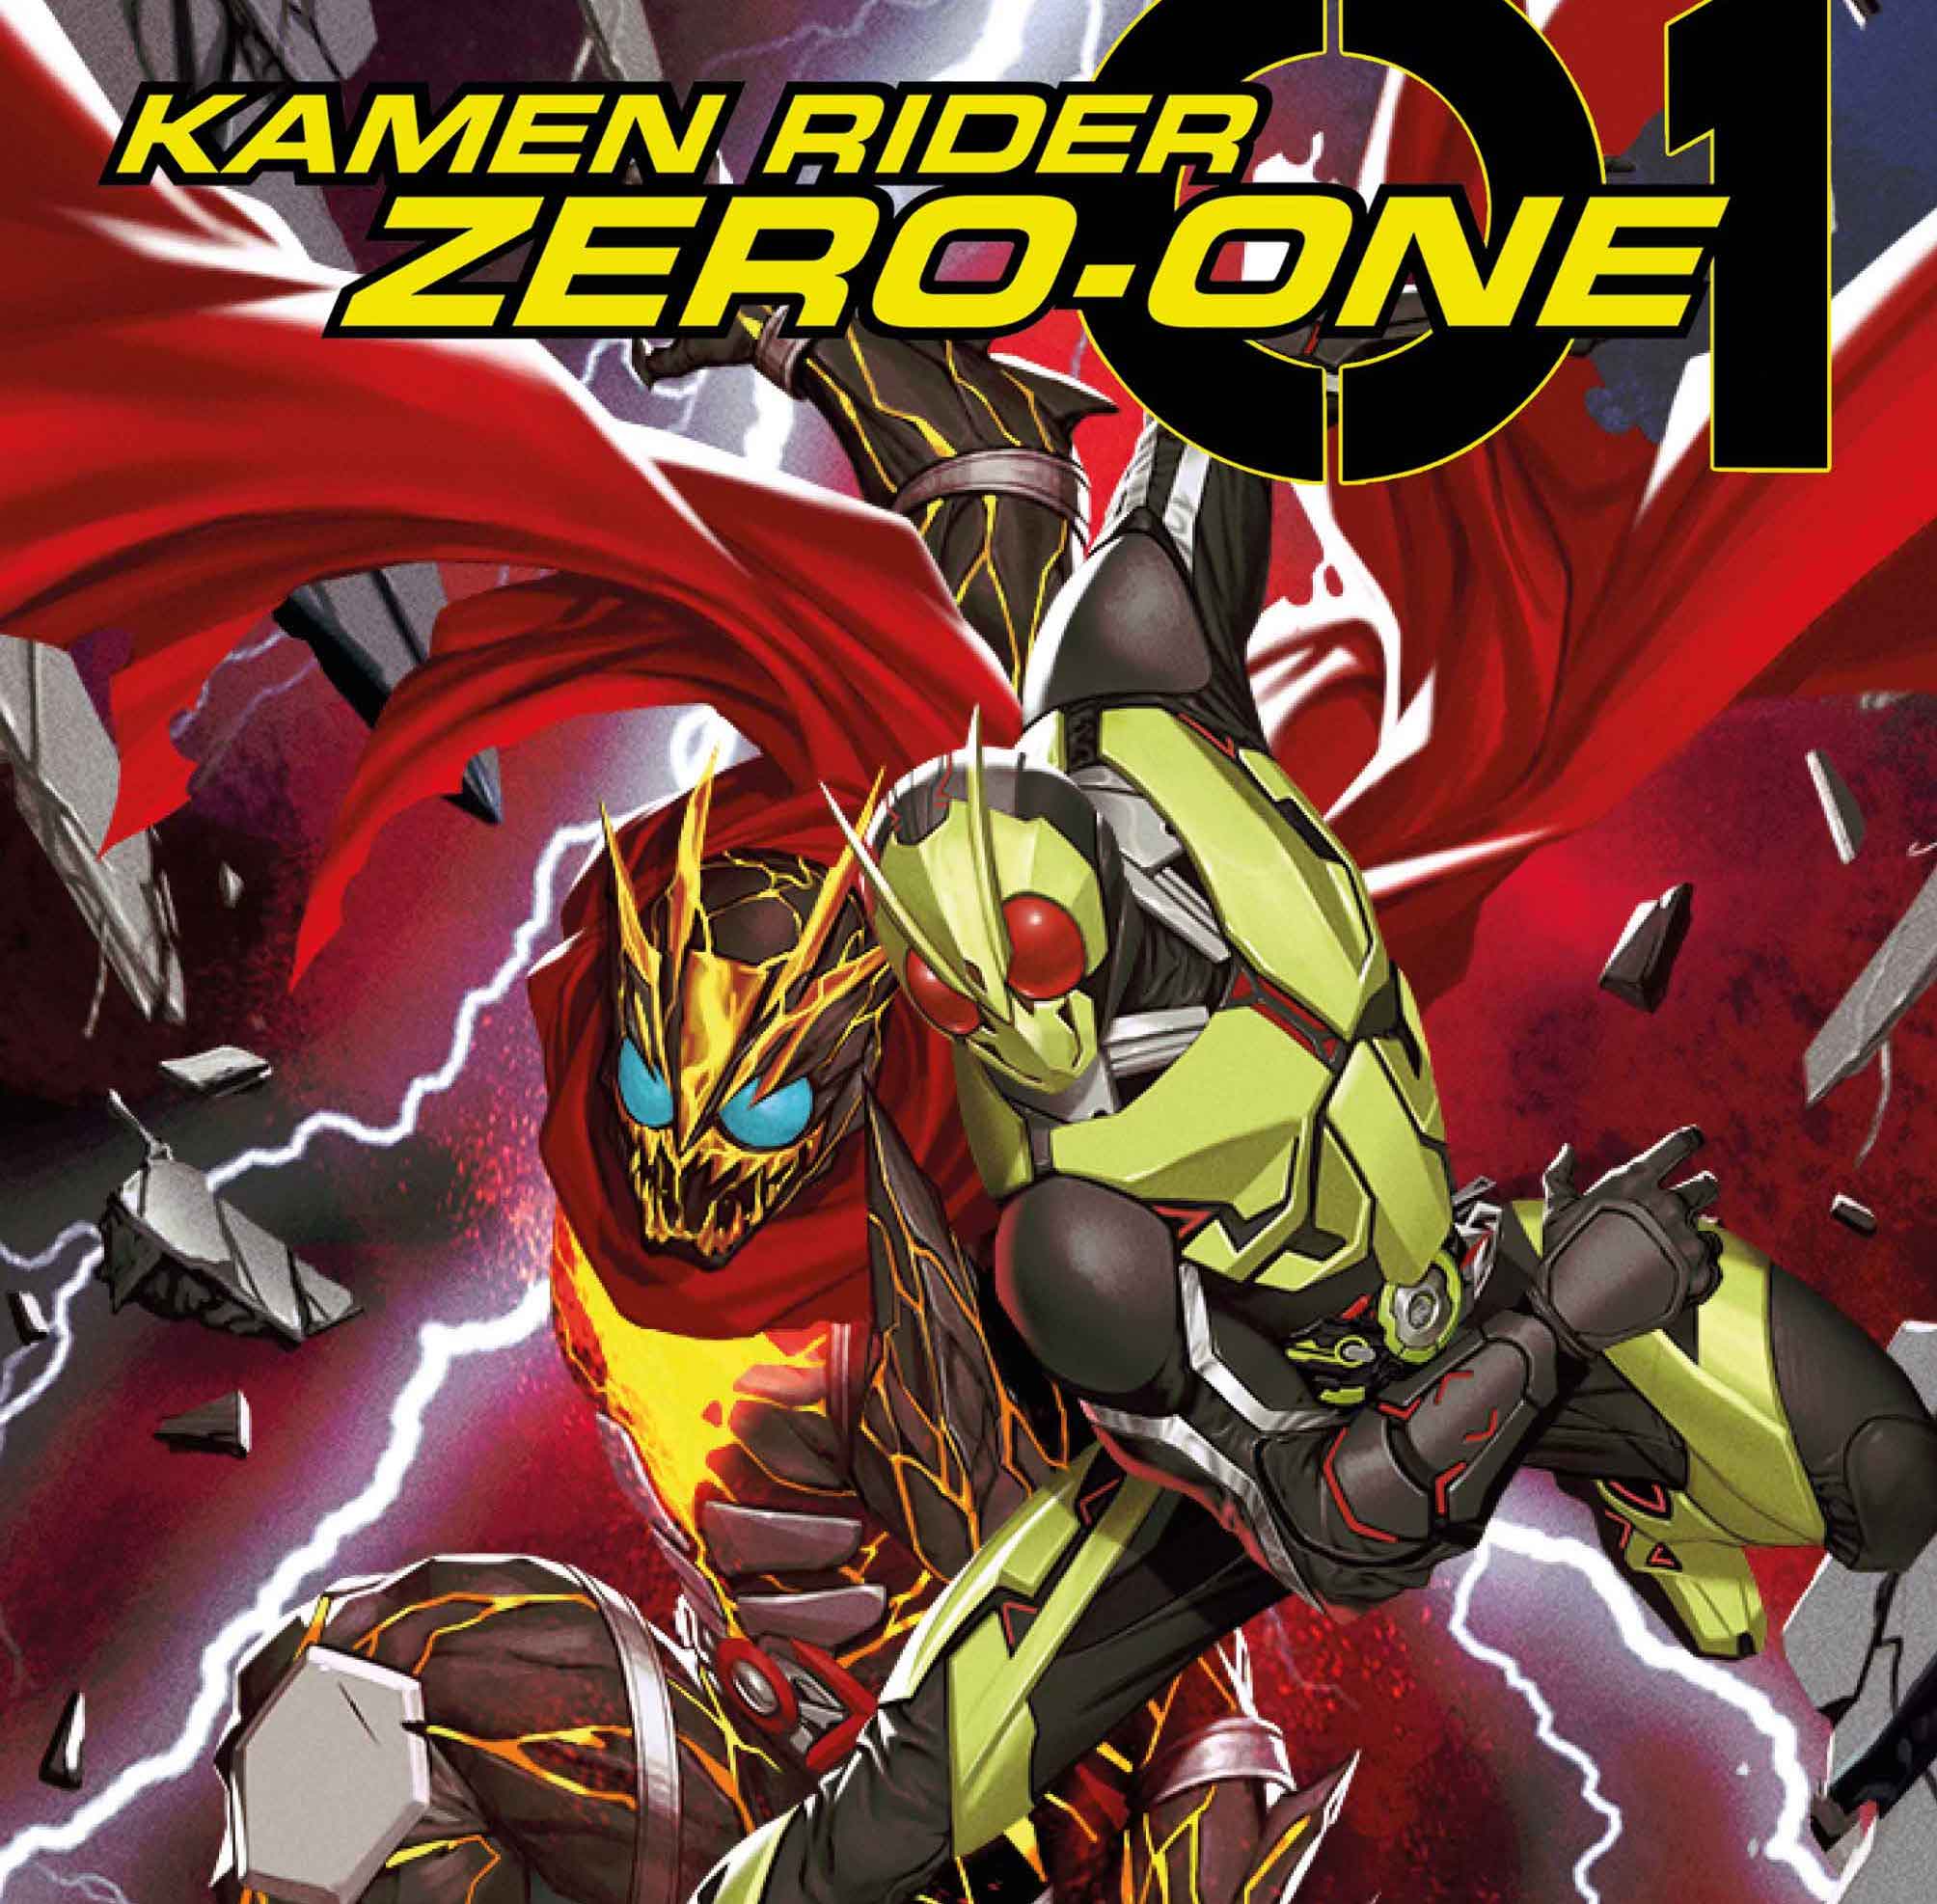 'Kamen Rider Zero-One' #1 is a poor showcase for a cool character